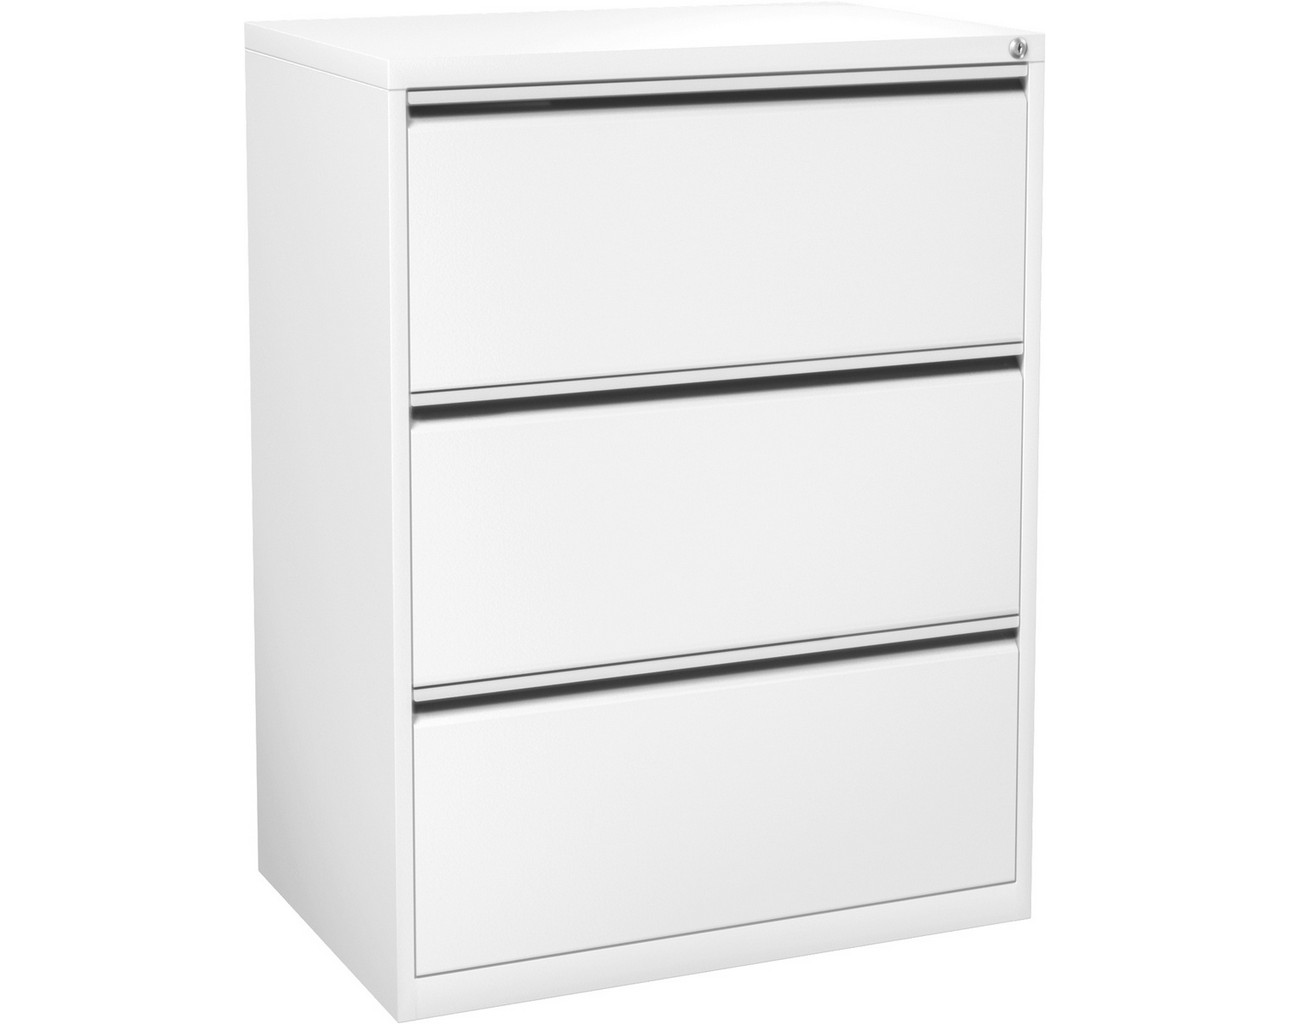 Steelwise Lateral Filing Cabinet – 3 Drawer in White